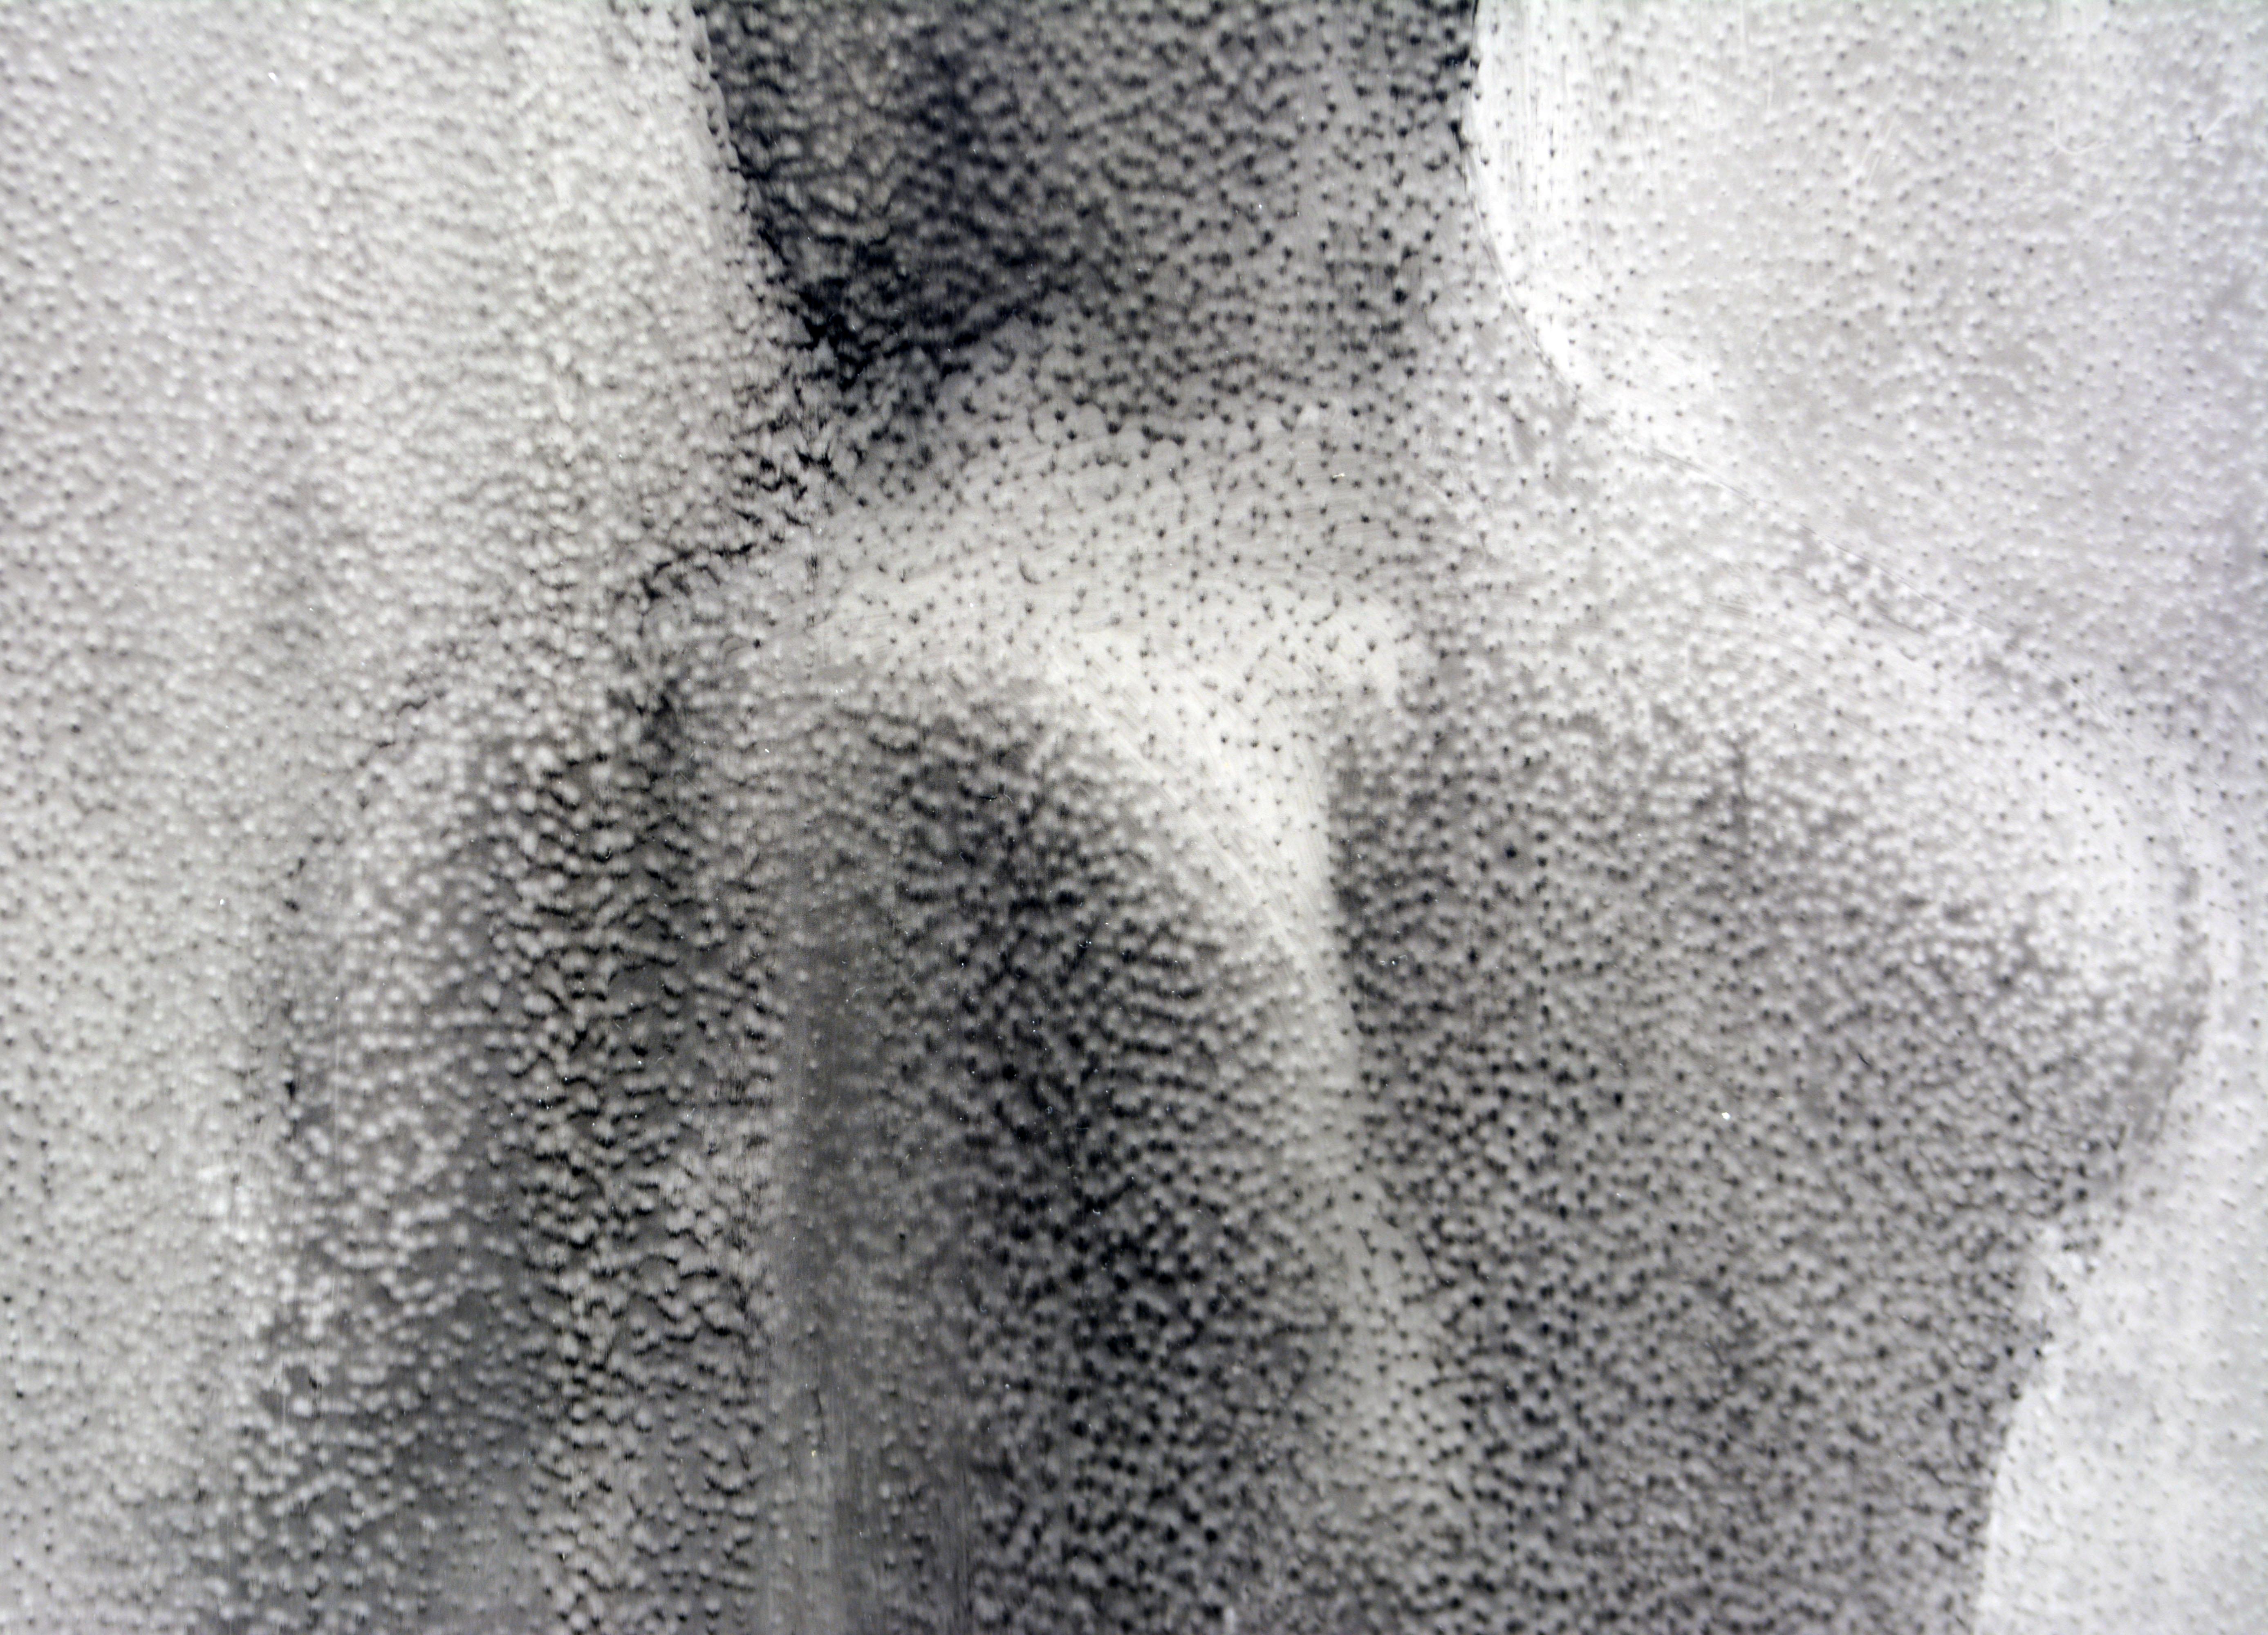 20th Century Michael David US b. 1954 'Small Shower III' Photo Based Ink on Mylar Male Nude For Sale